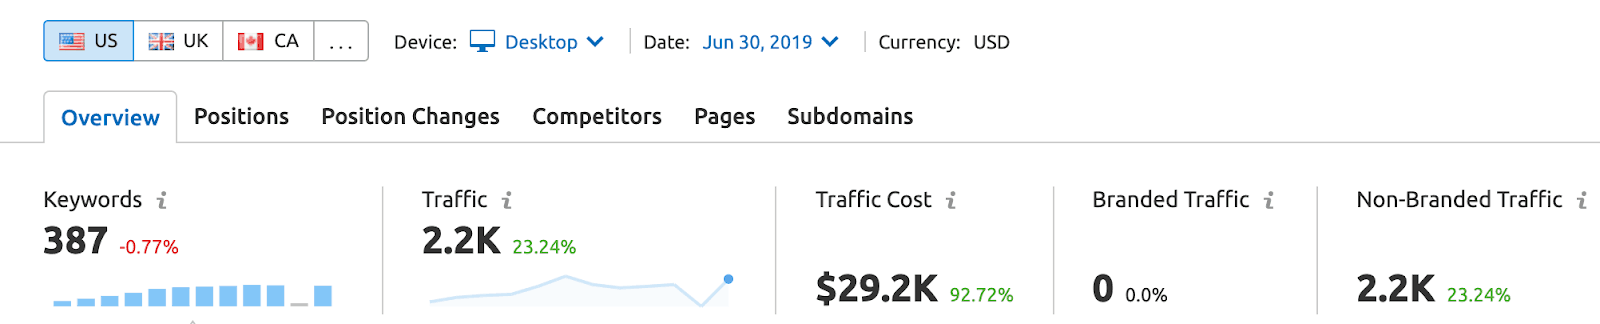 SEMrush screenshot showing how content marketing can impact your traffic cost utilizing certain keywords.